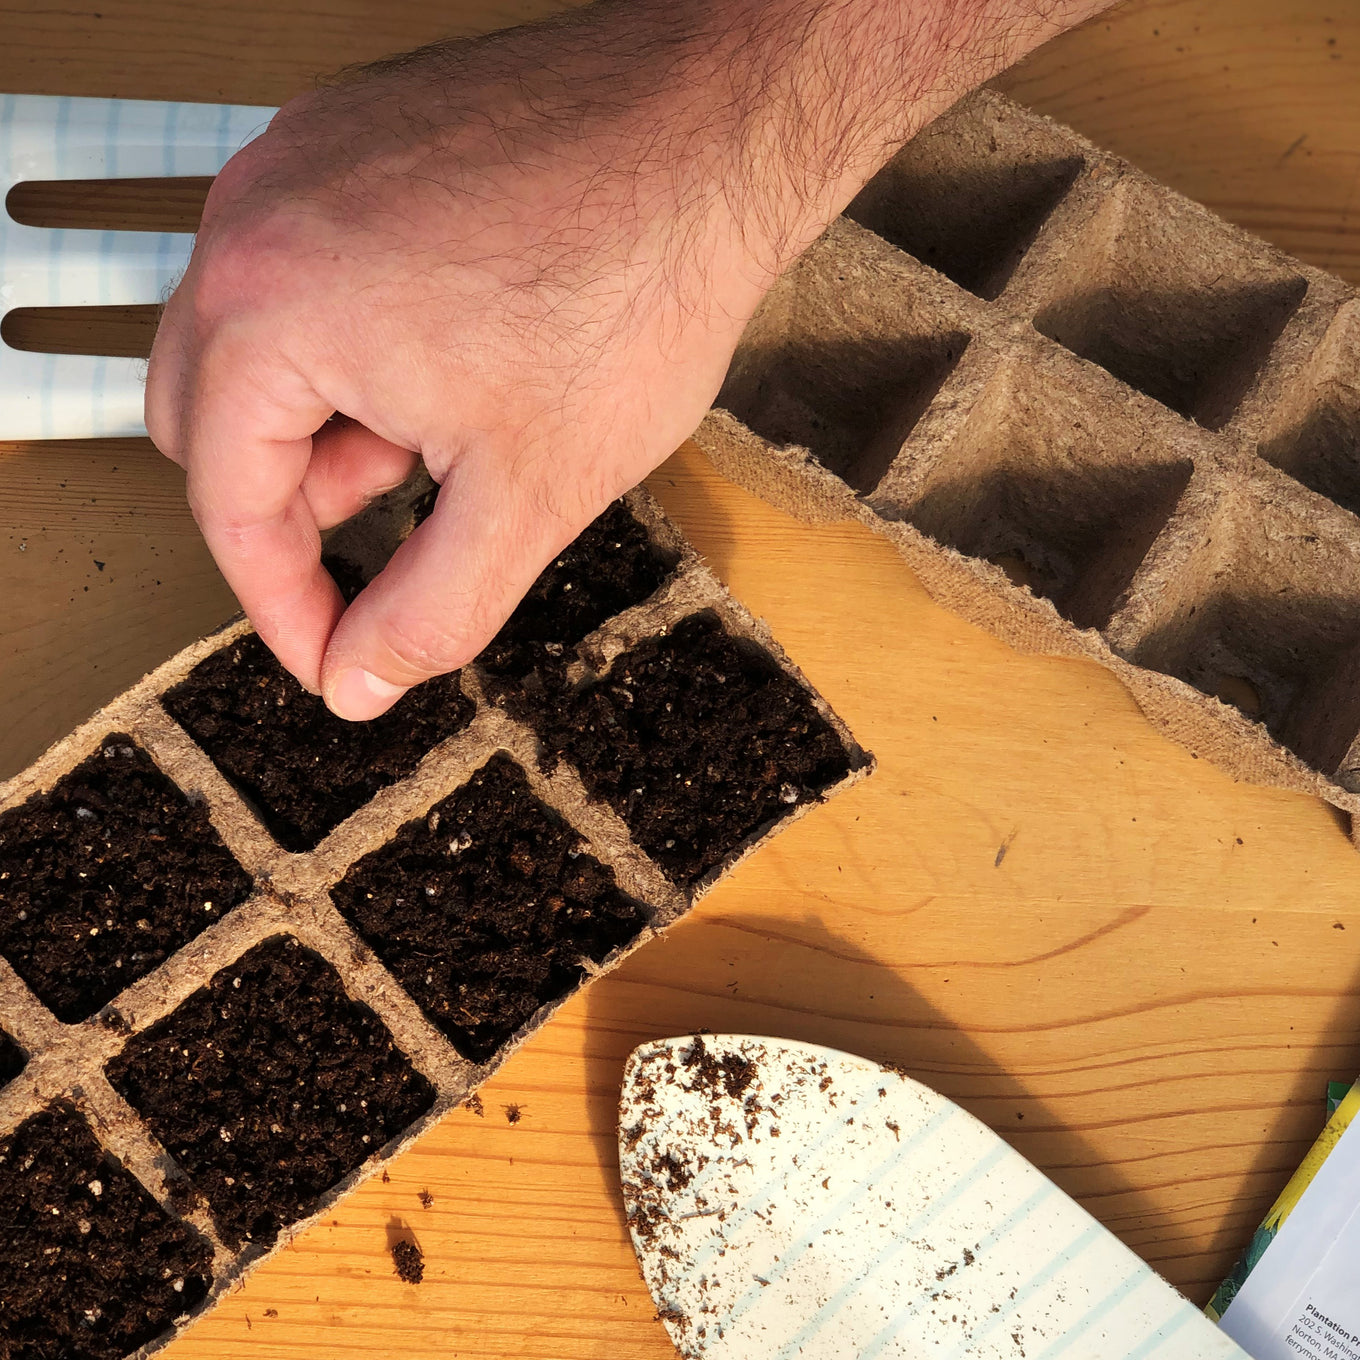 Growing Garden Sweet Hybrid Cucumber Seeds from Jiffy seed starting peat strip trays so they're easy to tear apart and transplant from within their peat cells.